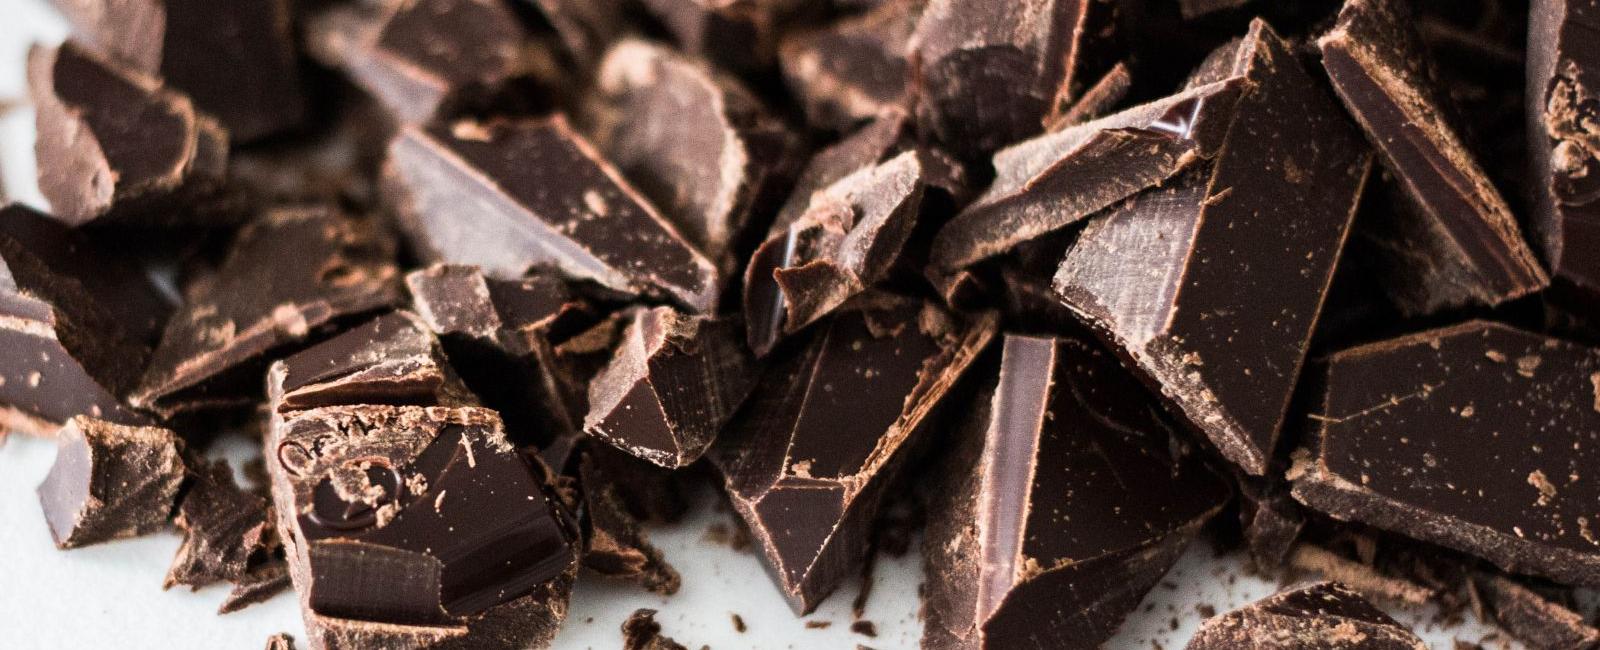 Can Dogs Eat Chocolate? An Anti-Poisoning Guide